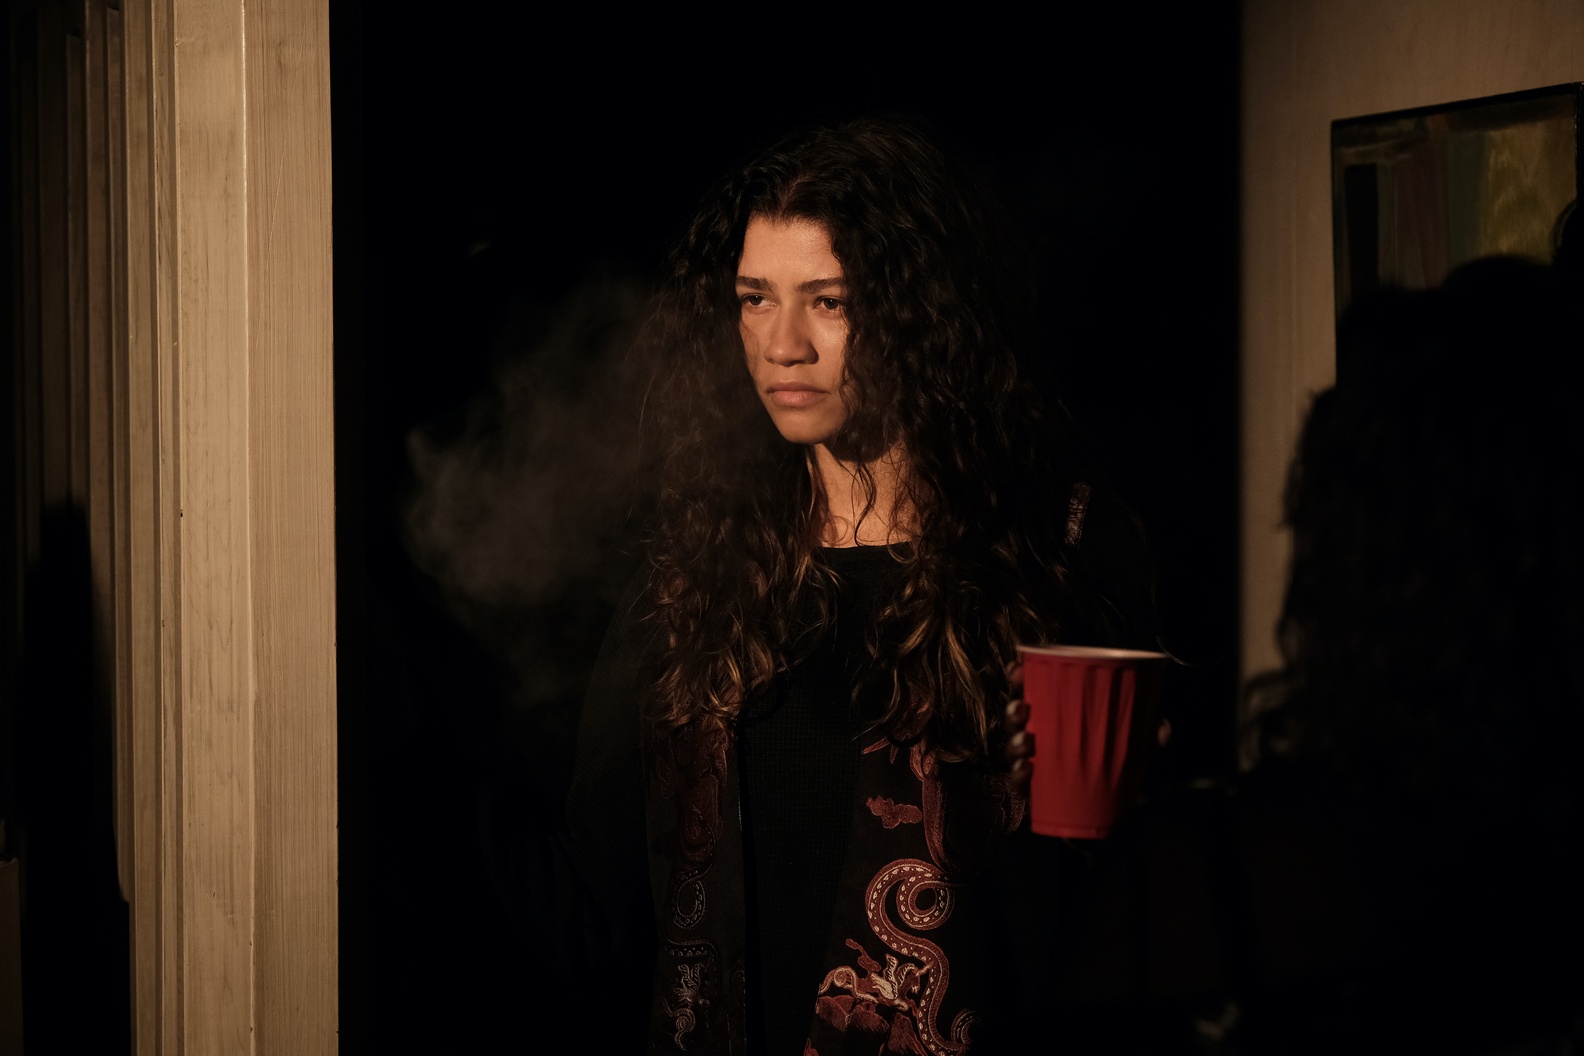 ‘Euphoria’ Season 2 Had the Best Digital Premiere of Any HBO Episode on HBO Max